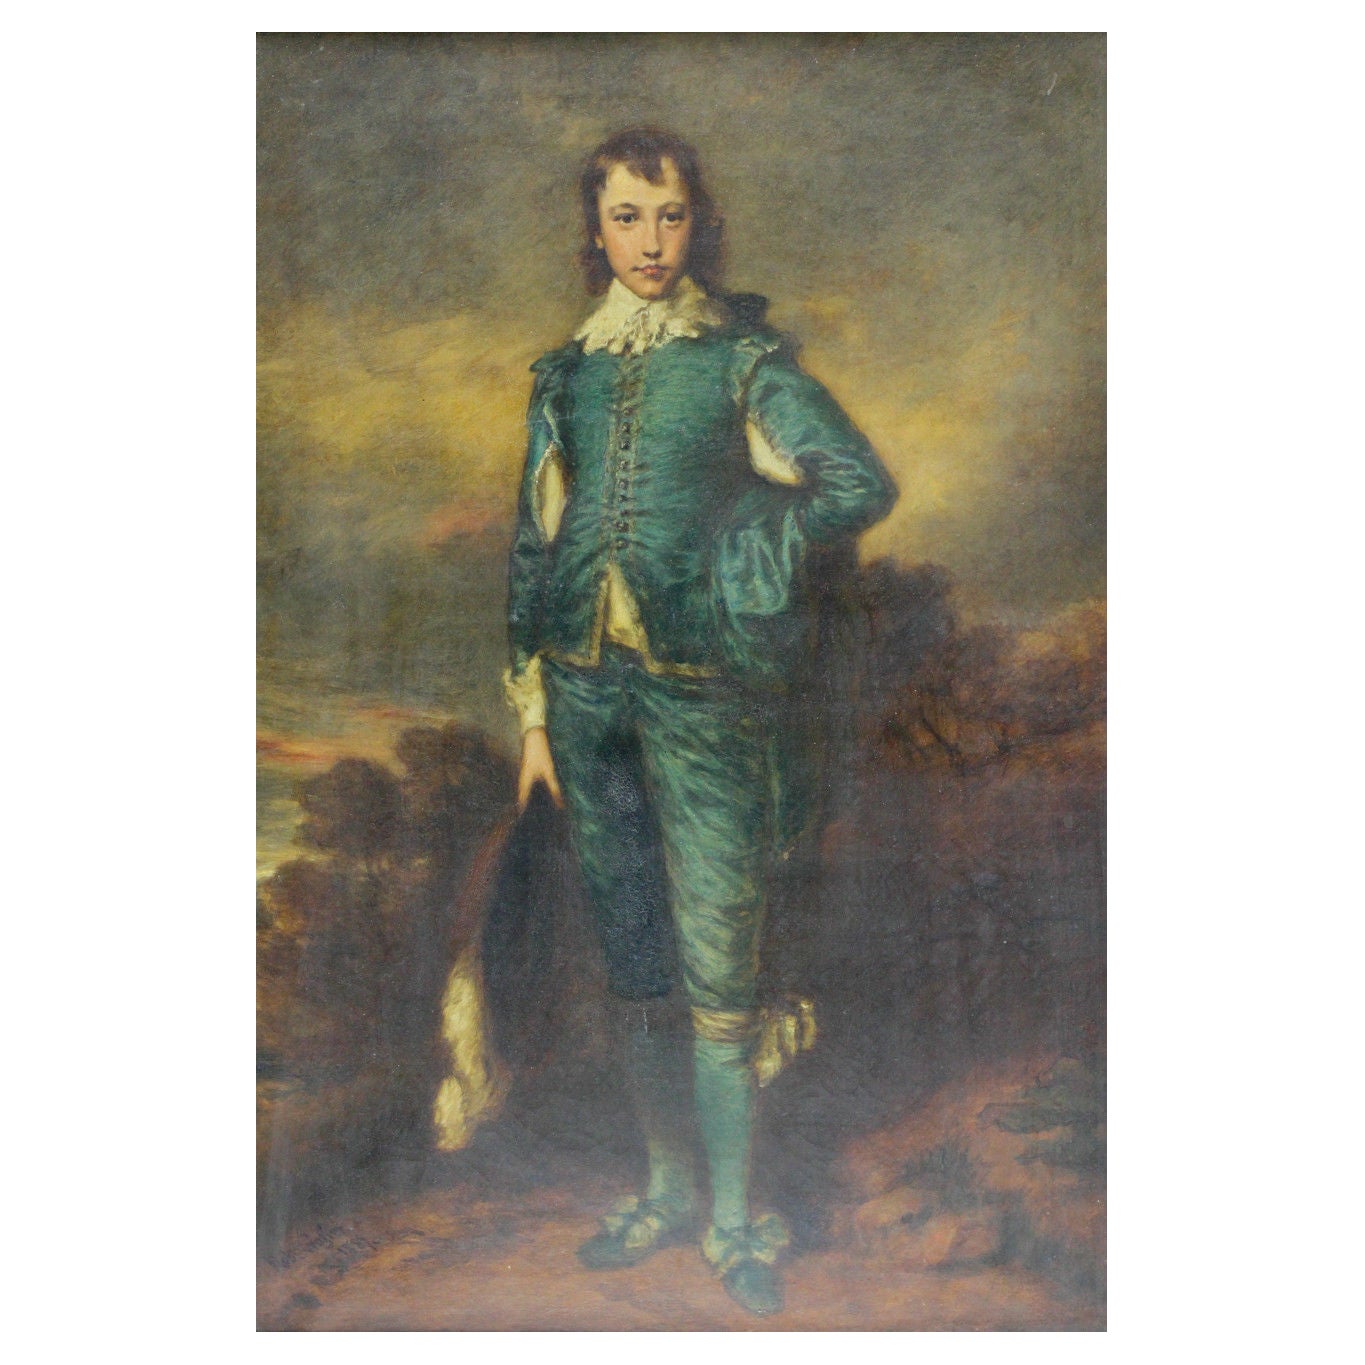 Robert Crozier Oil on Canvas Painting Blue Boy After Gainsborough